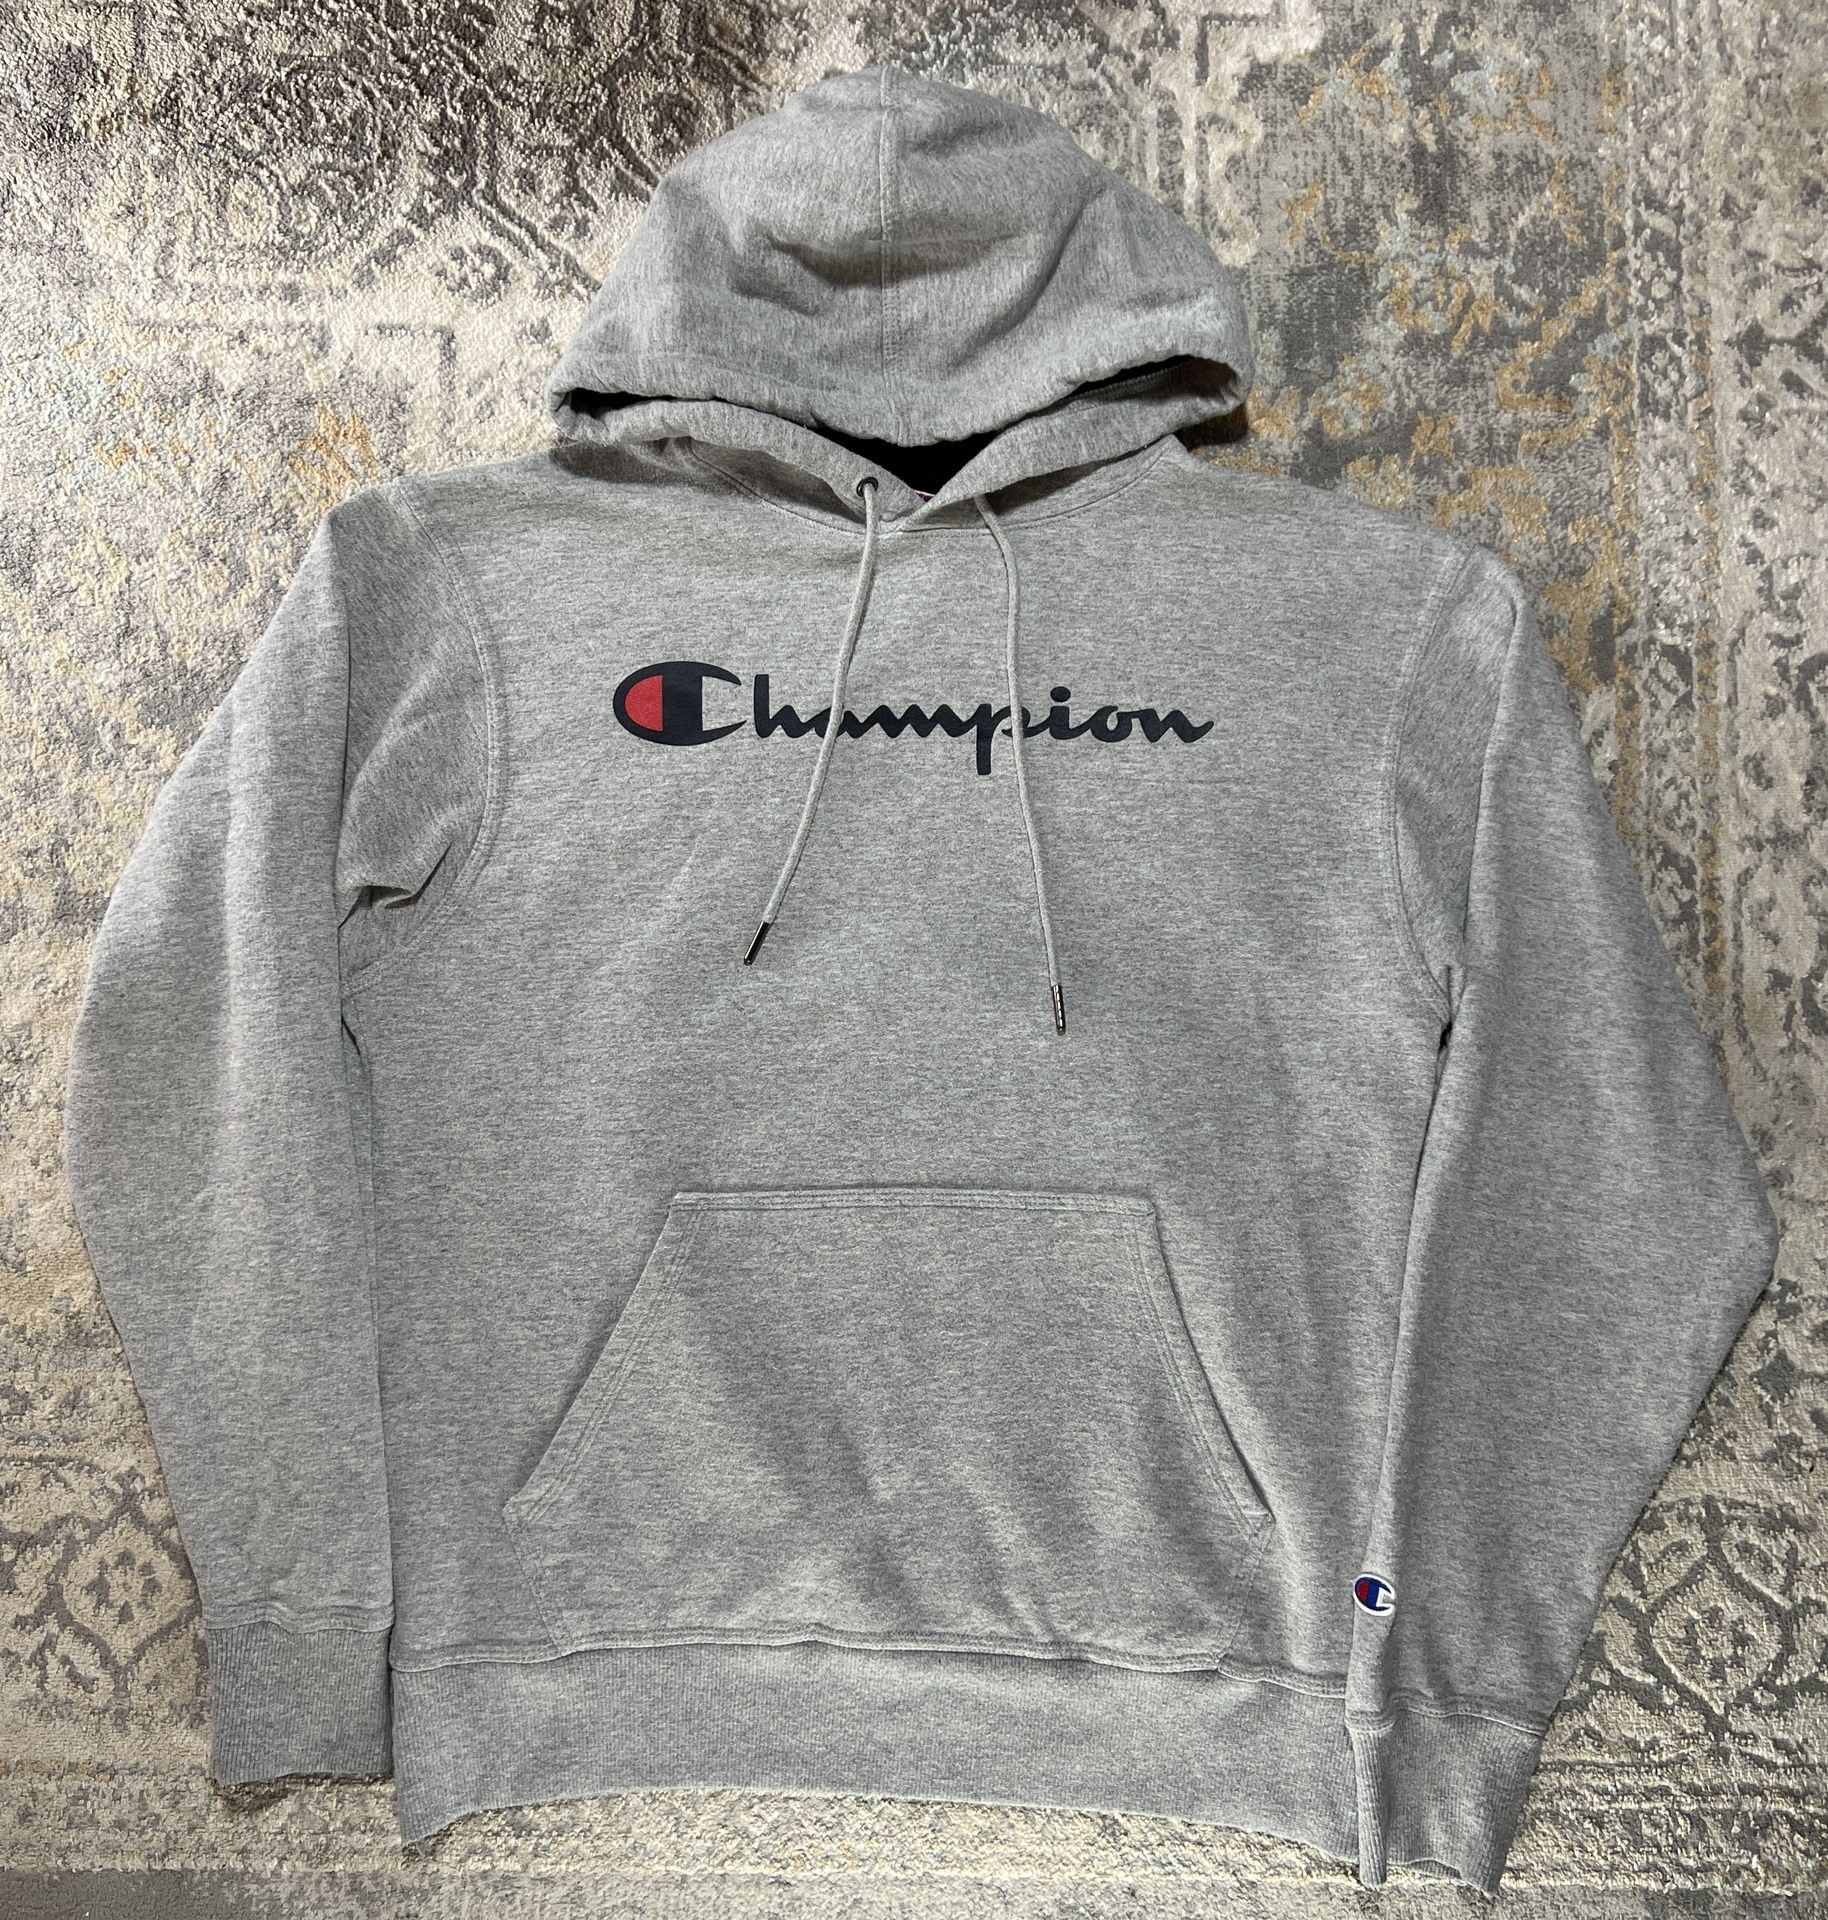 Champion Sweatshirt Men's Size M Gray Hoodie Spell out Chest Sweater